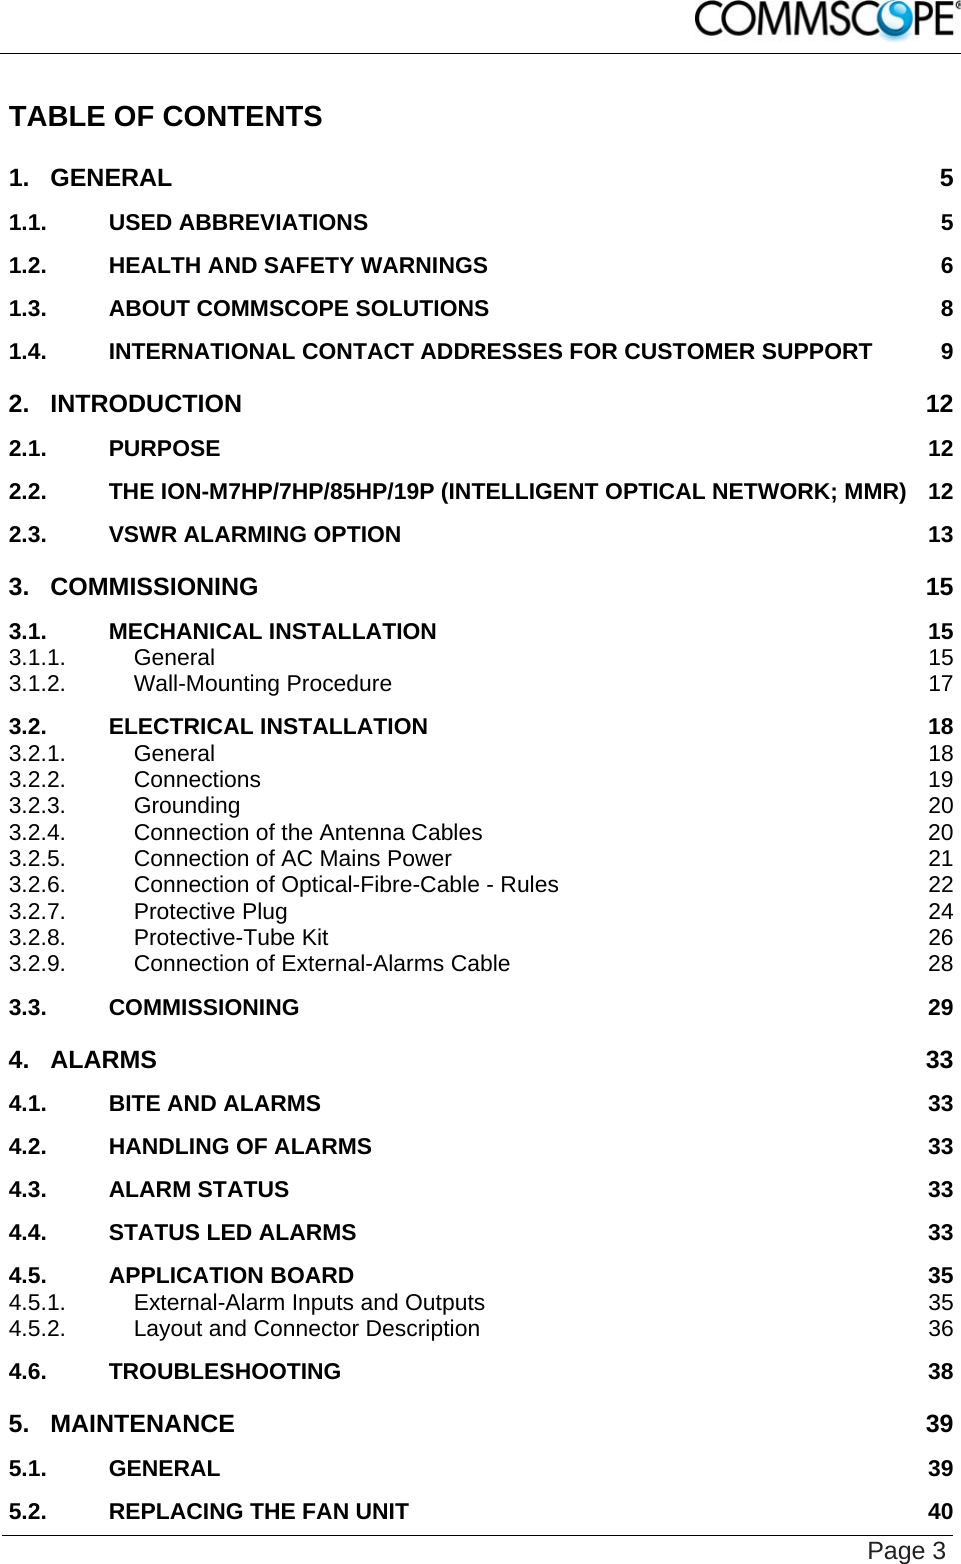    Page 3 TABLE OF CONTENTS 1. GENERAL 5 1.1. USED ABBREVIATIONS 5 1.2. HEALTH AND SAFETY WARNINGS 6 1.3. ABOUT COMMSCOPE SOLUTIONS 8 1.4. INTERNATIONAL CONTACT ADDRESSES FOR CUSTOMER SUPPORT 9 2. INTRODUCTION 12 2.1. PURPOSE 12 2.2. THE ION-M7HP/7HP/85HP/19P (INTELLIGENT OPTICAL NETWORK; MMR) 12 2.3. VSWR ALARMING OPTION 13 3. COMMISSIONING 15 3.1. MECHANICAL INSTALLATION 15 3.1.1. General 15 3.1.2. Wall-Mounting Procedure 17 3.2. ELECTRICAL INSTALLATION 18 3.2.1. General 18 3.2.2. Connections 19 3.2.3. Grounding 20 3.2.4. Connection of the Antenna Cables 20 3.2.5. Connection of AC Mains Power 21 3.2.6. Connection of Optical-Fibre-Cable - Rules 22 3.2.7. Protective Plug 24 3.2.8. Protective-Tube Kit 26 3.2.9. Connection of External-Alarms Cable 28 3.3. COMMISSIONING 29 4. ALARMS 33 4.1. BITE AND ALARMS 33 4.2. HANDLING OF ALARMS 33 4.3. ALARM STATUS 33 4.4. STATUS LED ALARMS 33 4.5. APPLICATION BOARD 35 4.5.1. External-Alarm Inputs and Outputs 35 4.5.2. Layout and Connector Description 36 4.6. TROUBLESHOOTING 38 5. MAINTENANCE 39 5.1. GENERAL 39 5.2. REPLACING THE FAN UNIT 40 